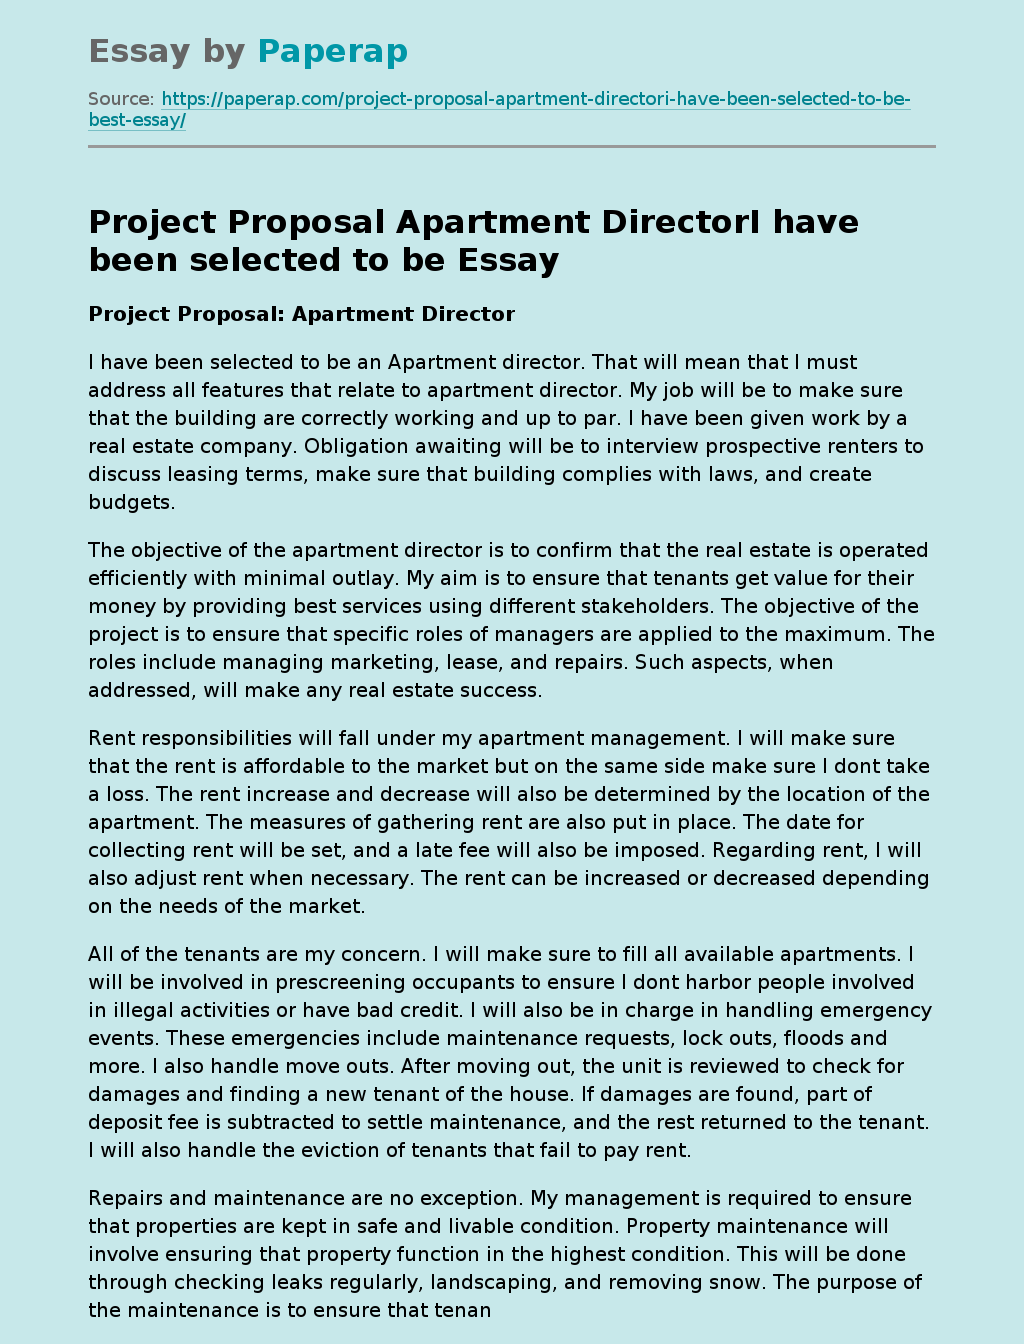 Project Proposal Apartment DirectorI have been selected to be